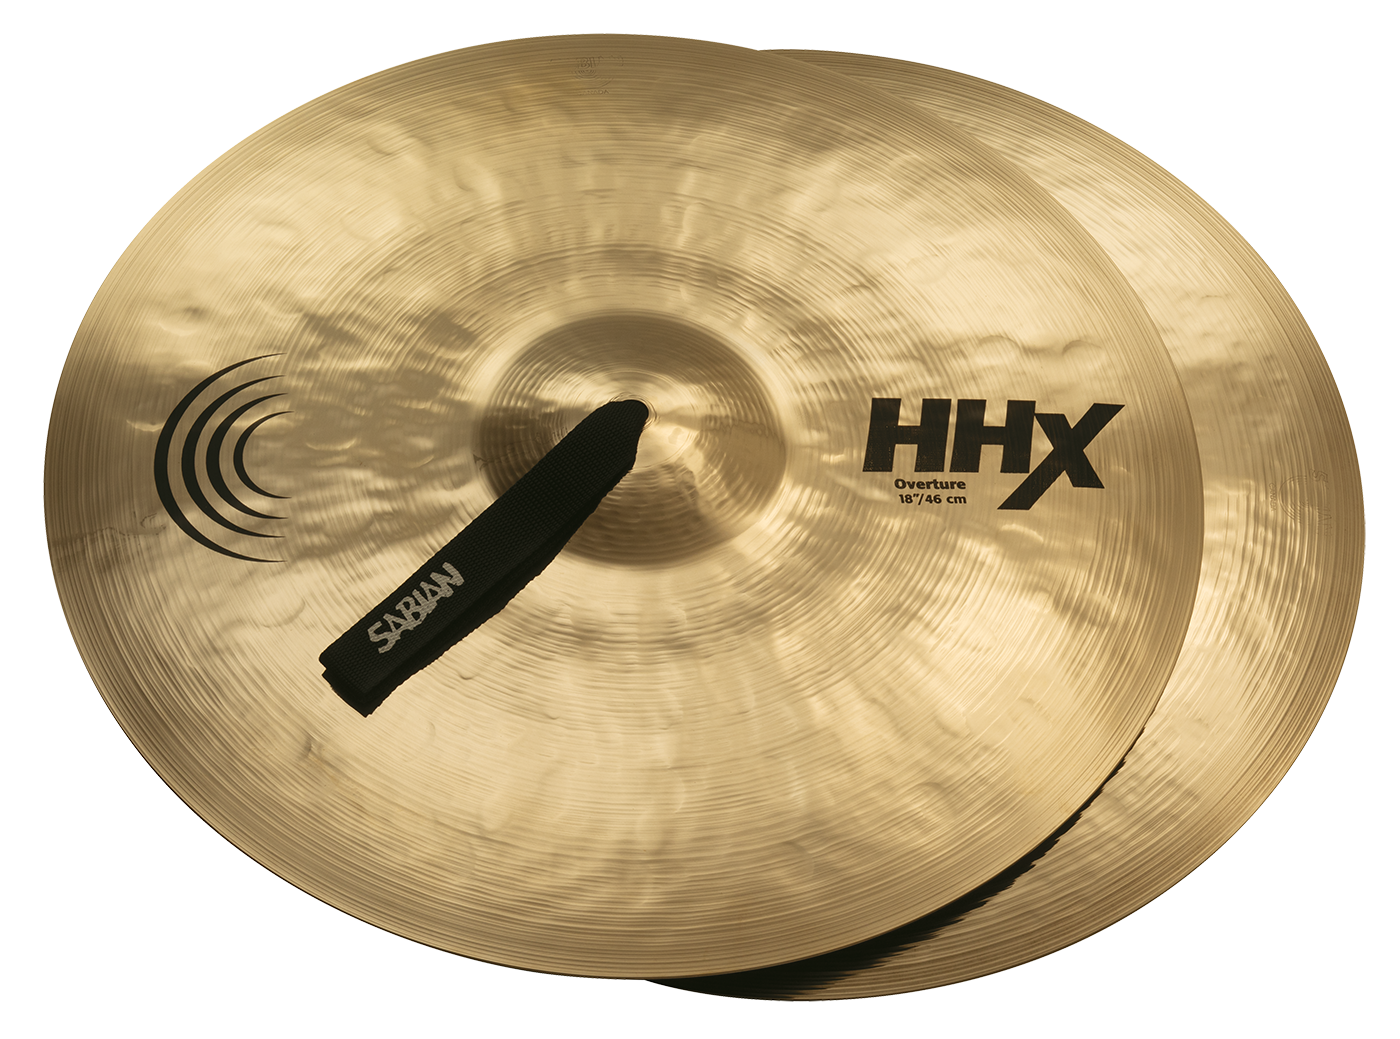 18” HHX Overture BR.